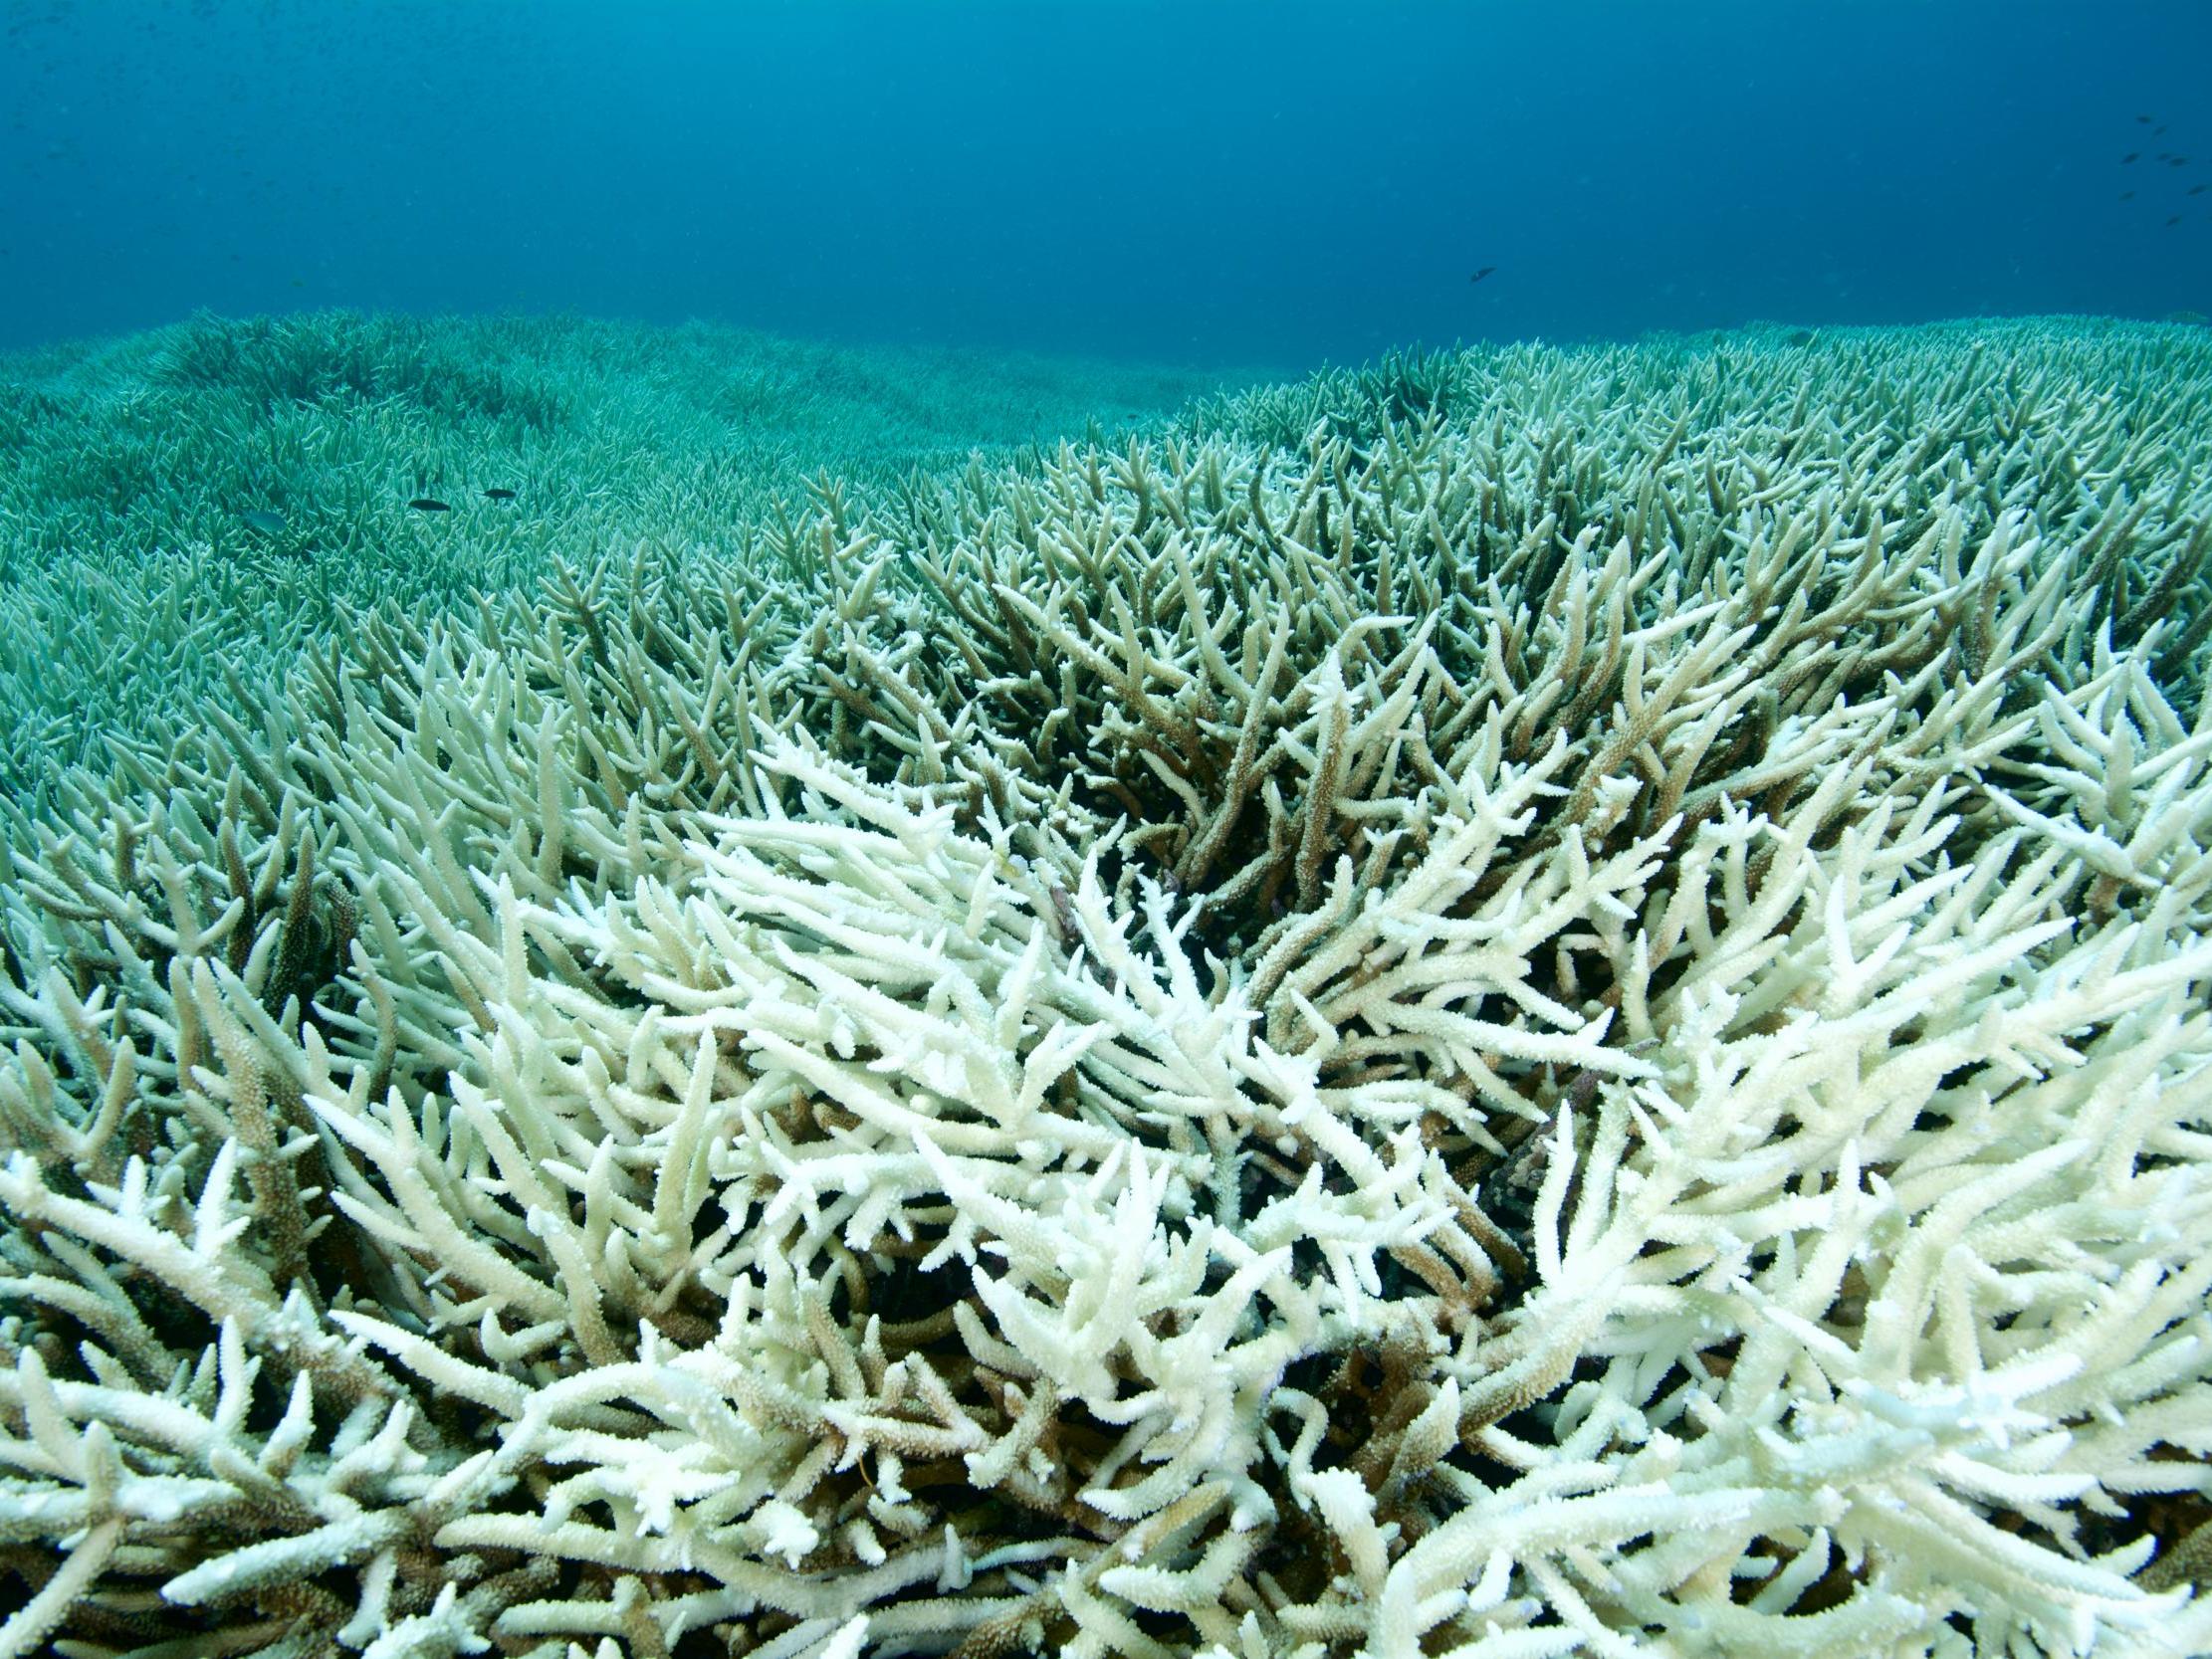 Great Barrier Reef experiencing most widespread bleaching on record due to climate change